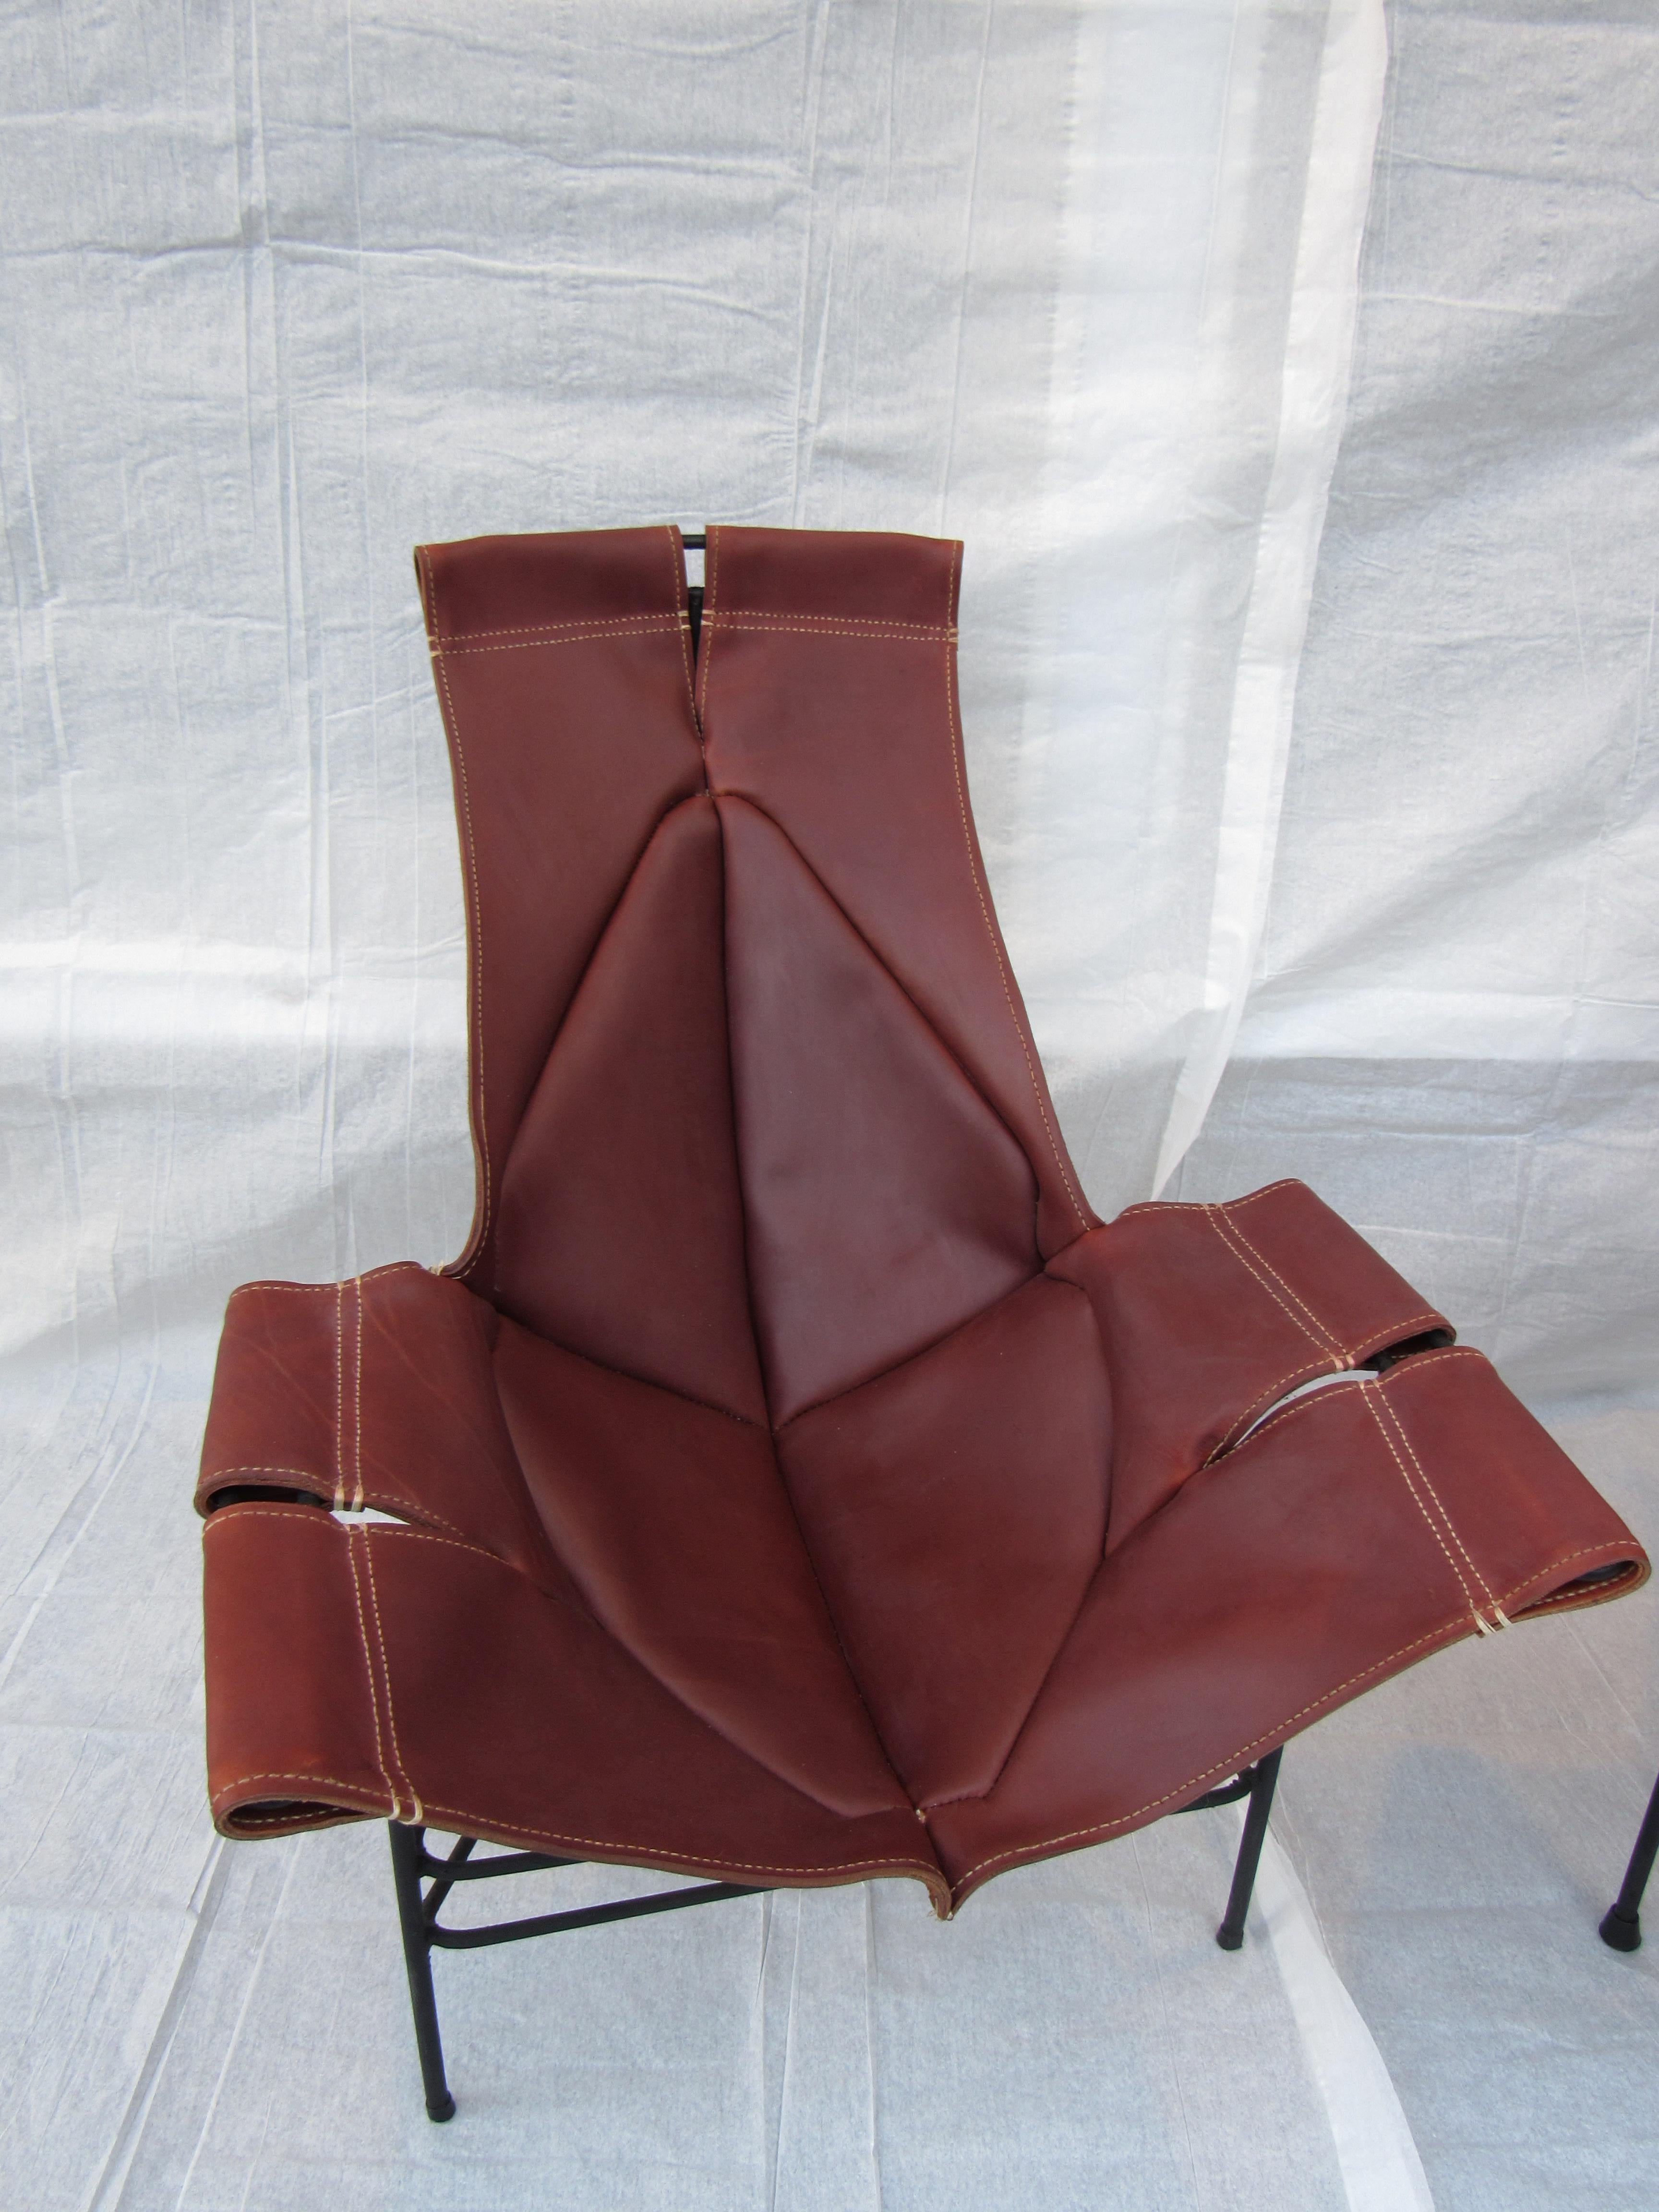 American Wrought Iron Jerry Johnson Leather Sling Lounge Chair (3) Leathercraft 1954 For Sale